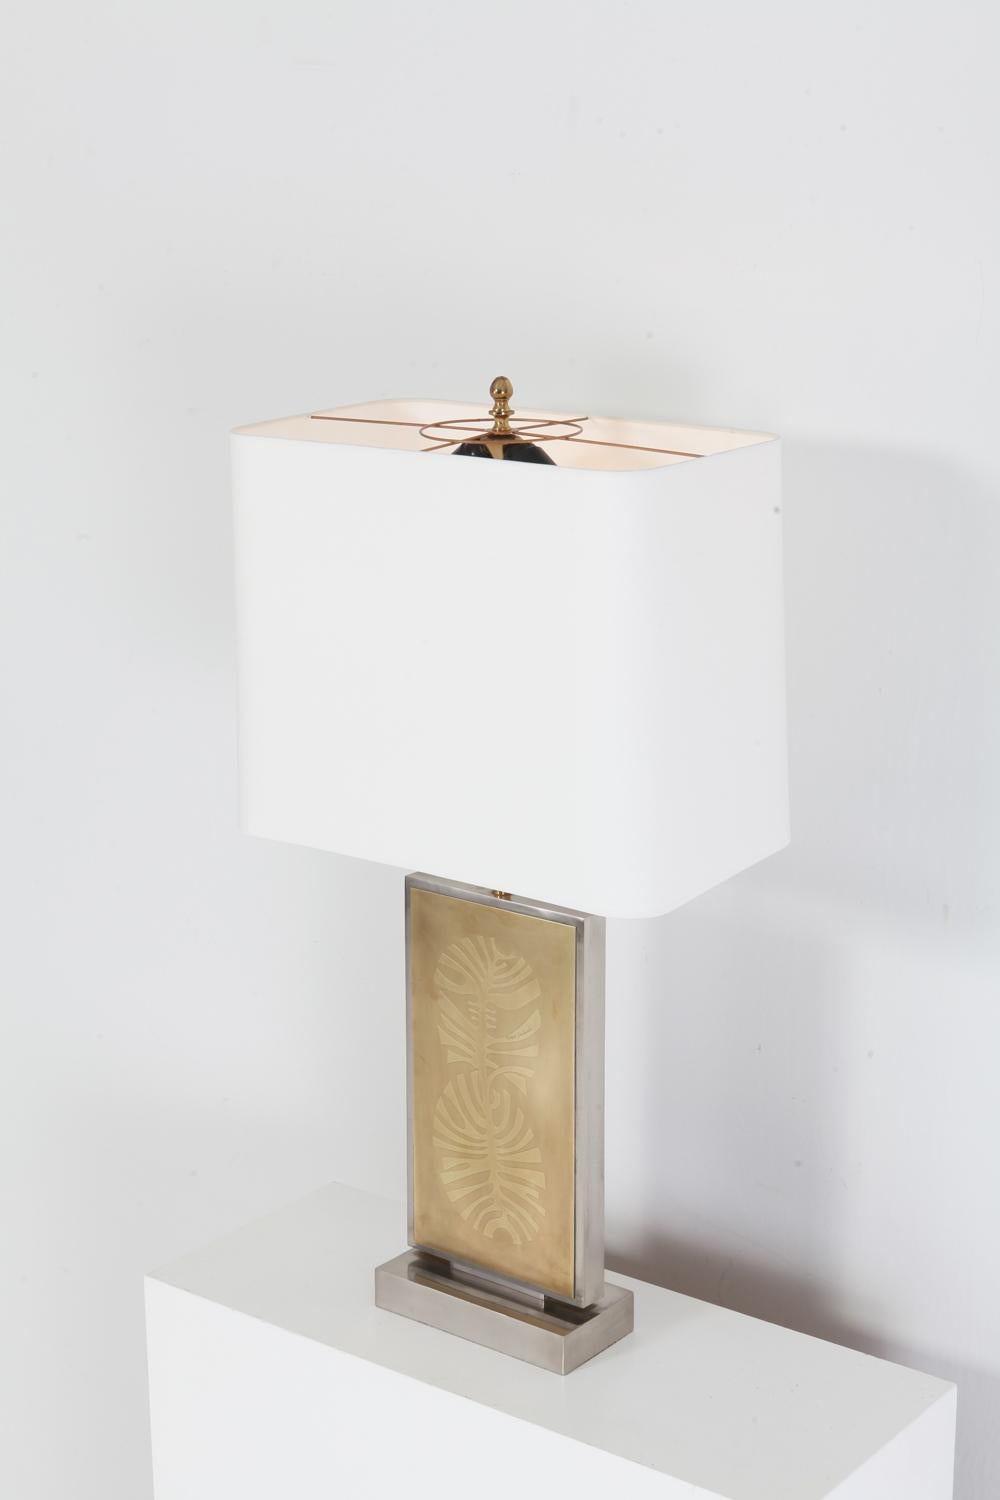 Hollywood Regency 1970s huge and impressive table lamp signed by the artist, Roger Vanhevel.
Stainless steel chromed frame; brass etched artwork in the centre and a new white linen shade on top.
Would fit well in an eclectic maximalist